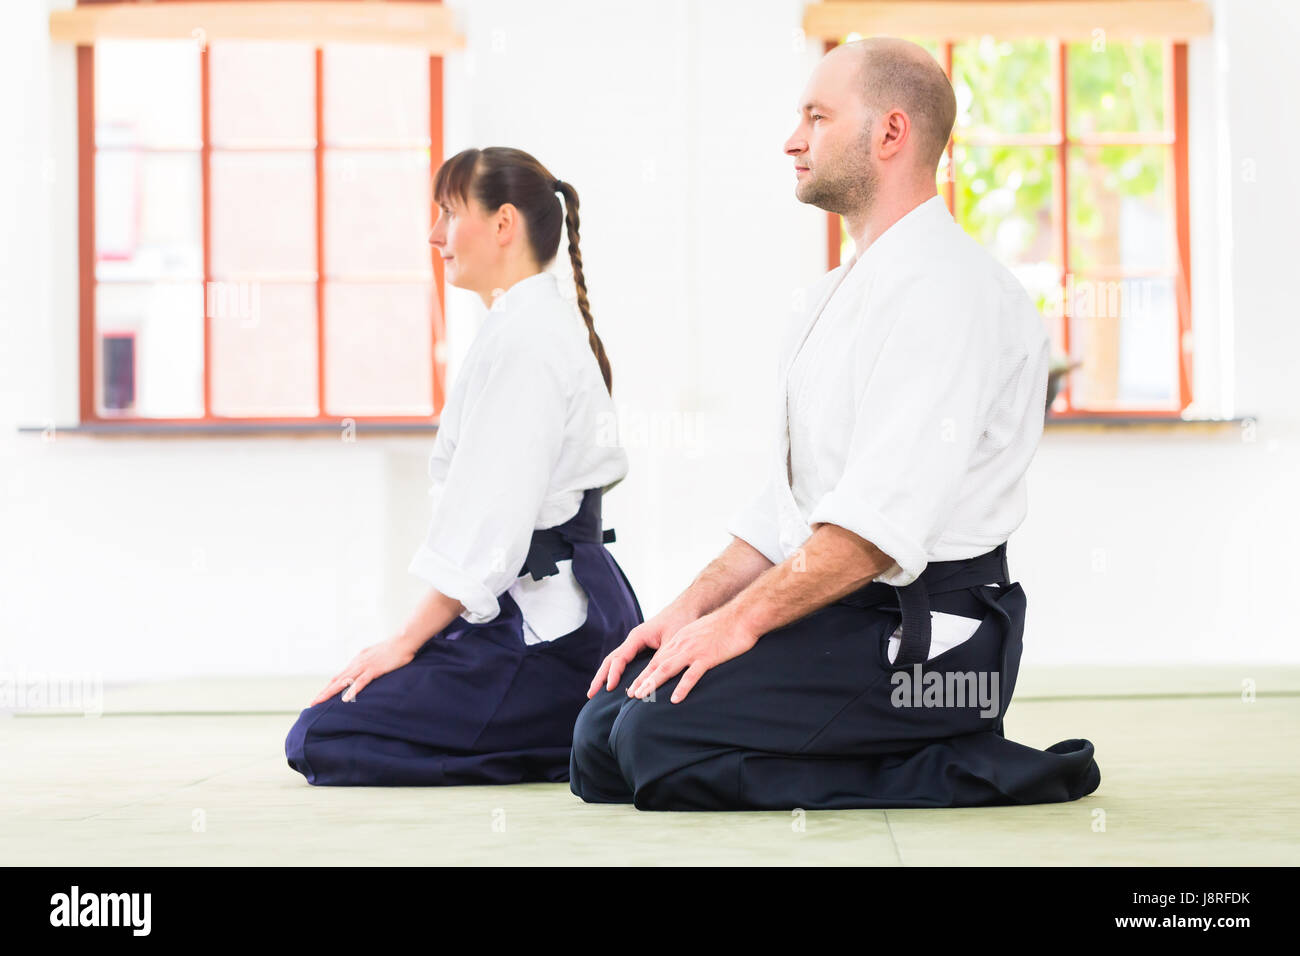 Teacher and student at Aikido martial arts school Stock Photo